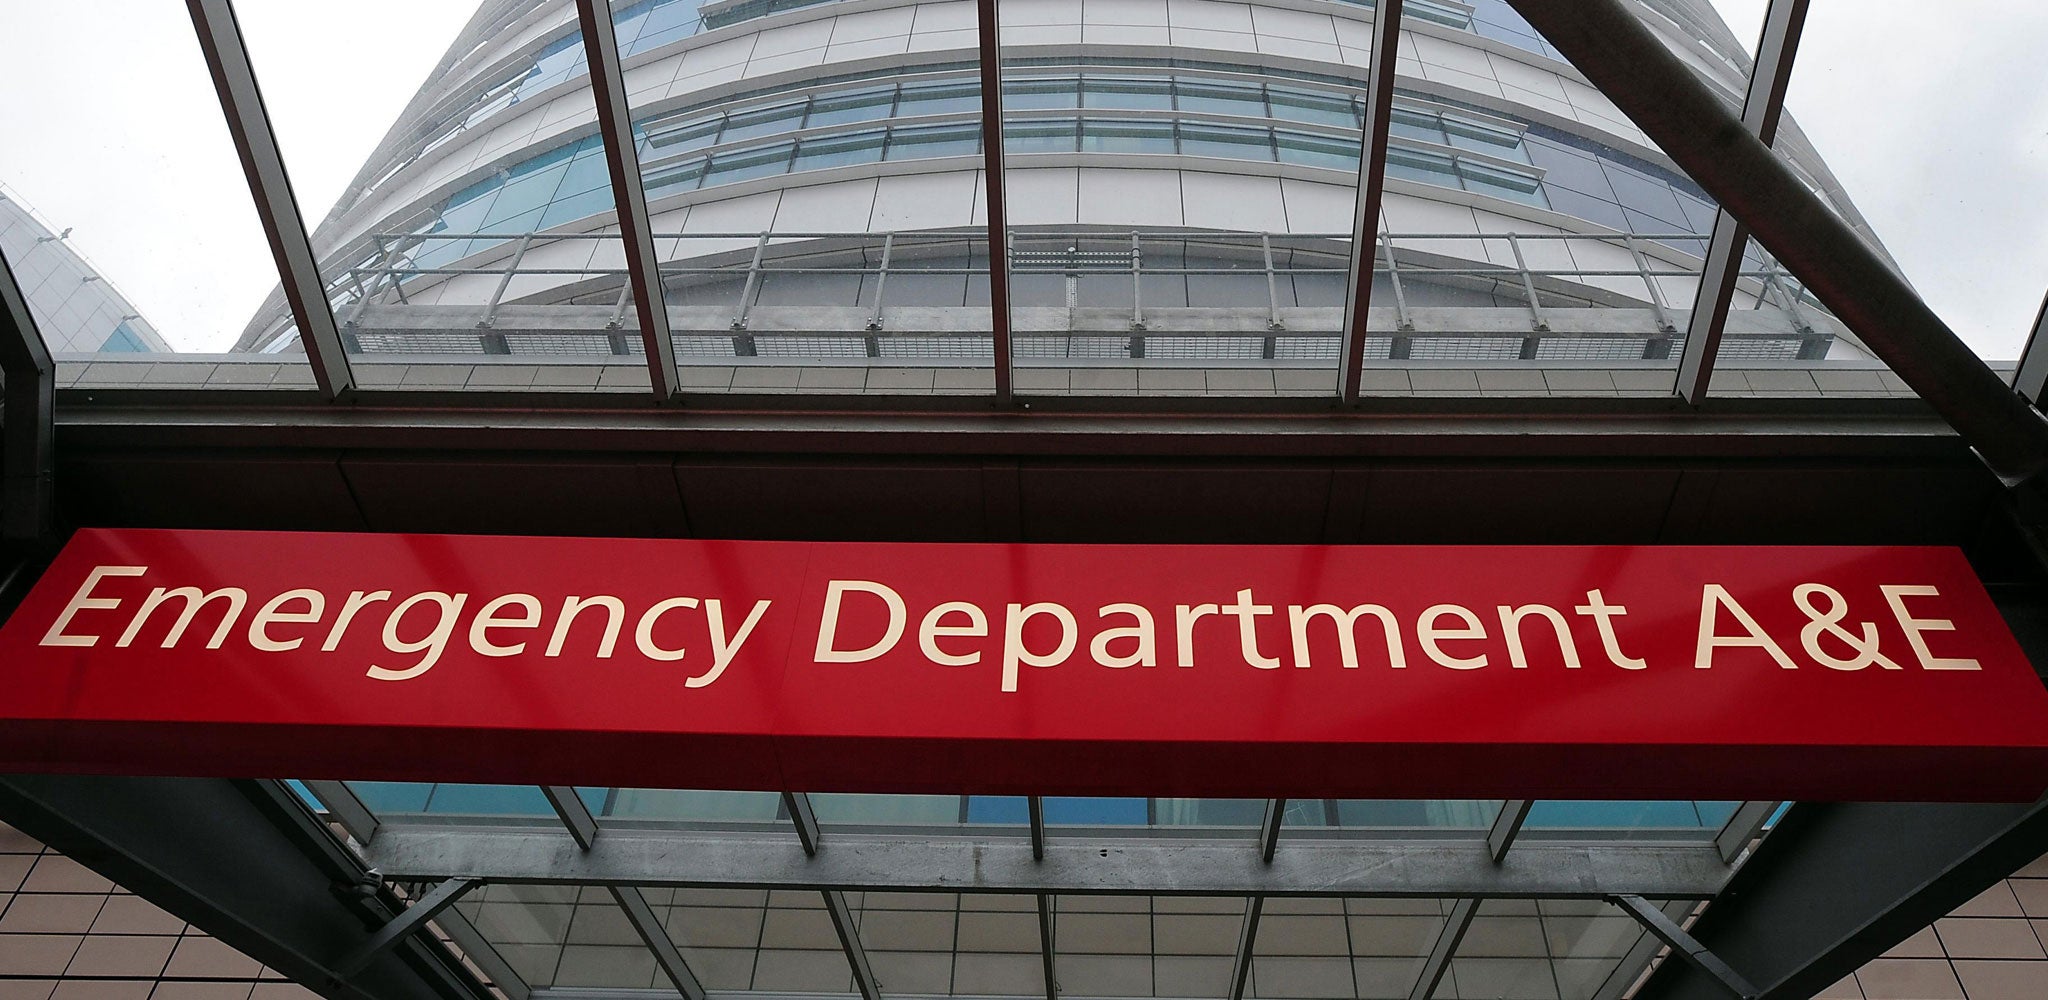 Inspectors from the Care Quality Commission found that the A&E department at Queen's Hospital, Romford, was still failing to protect people's safety and welfare